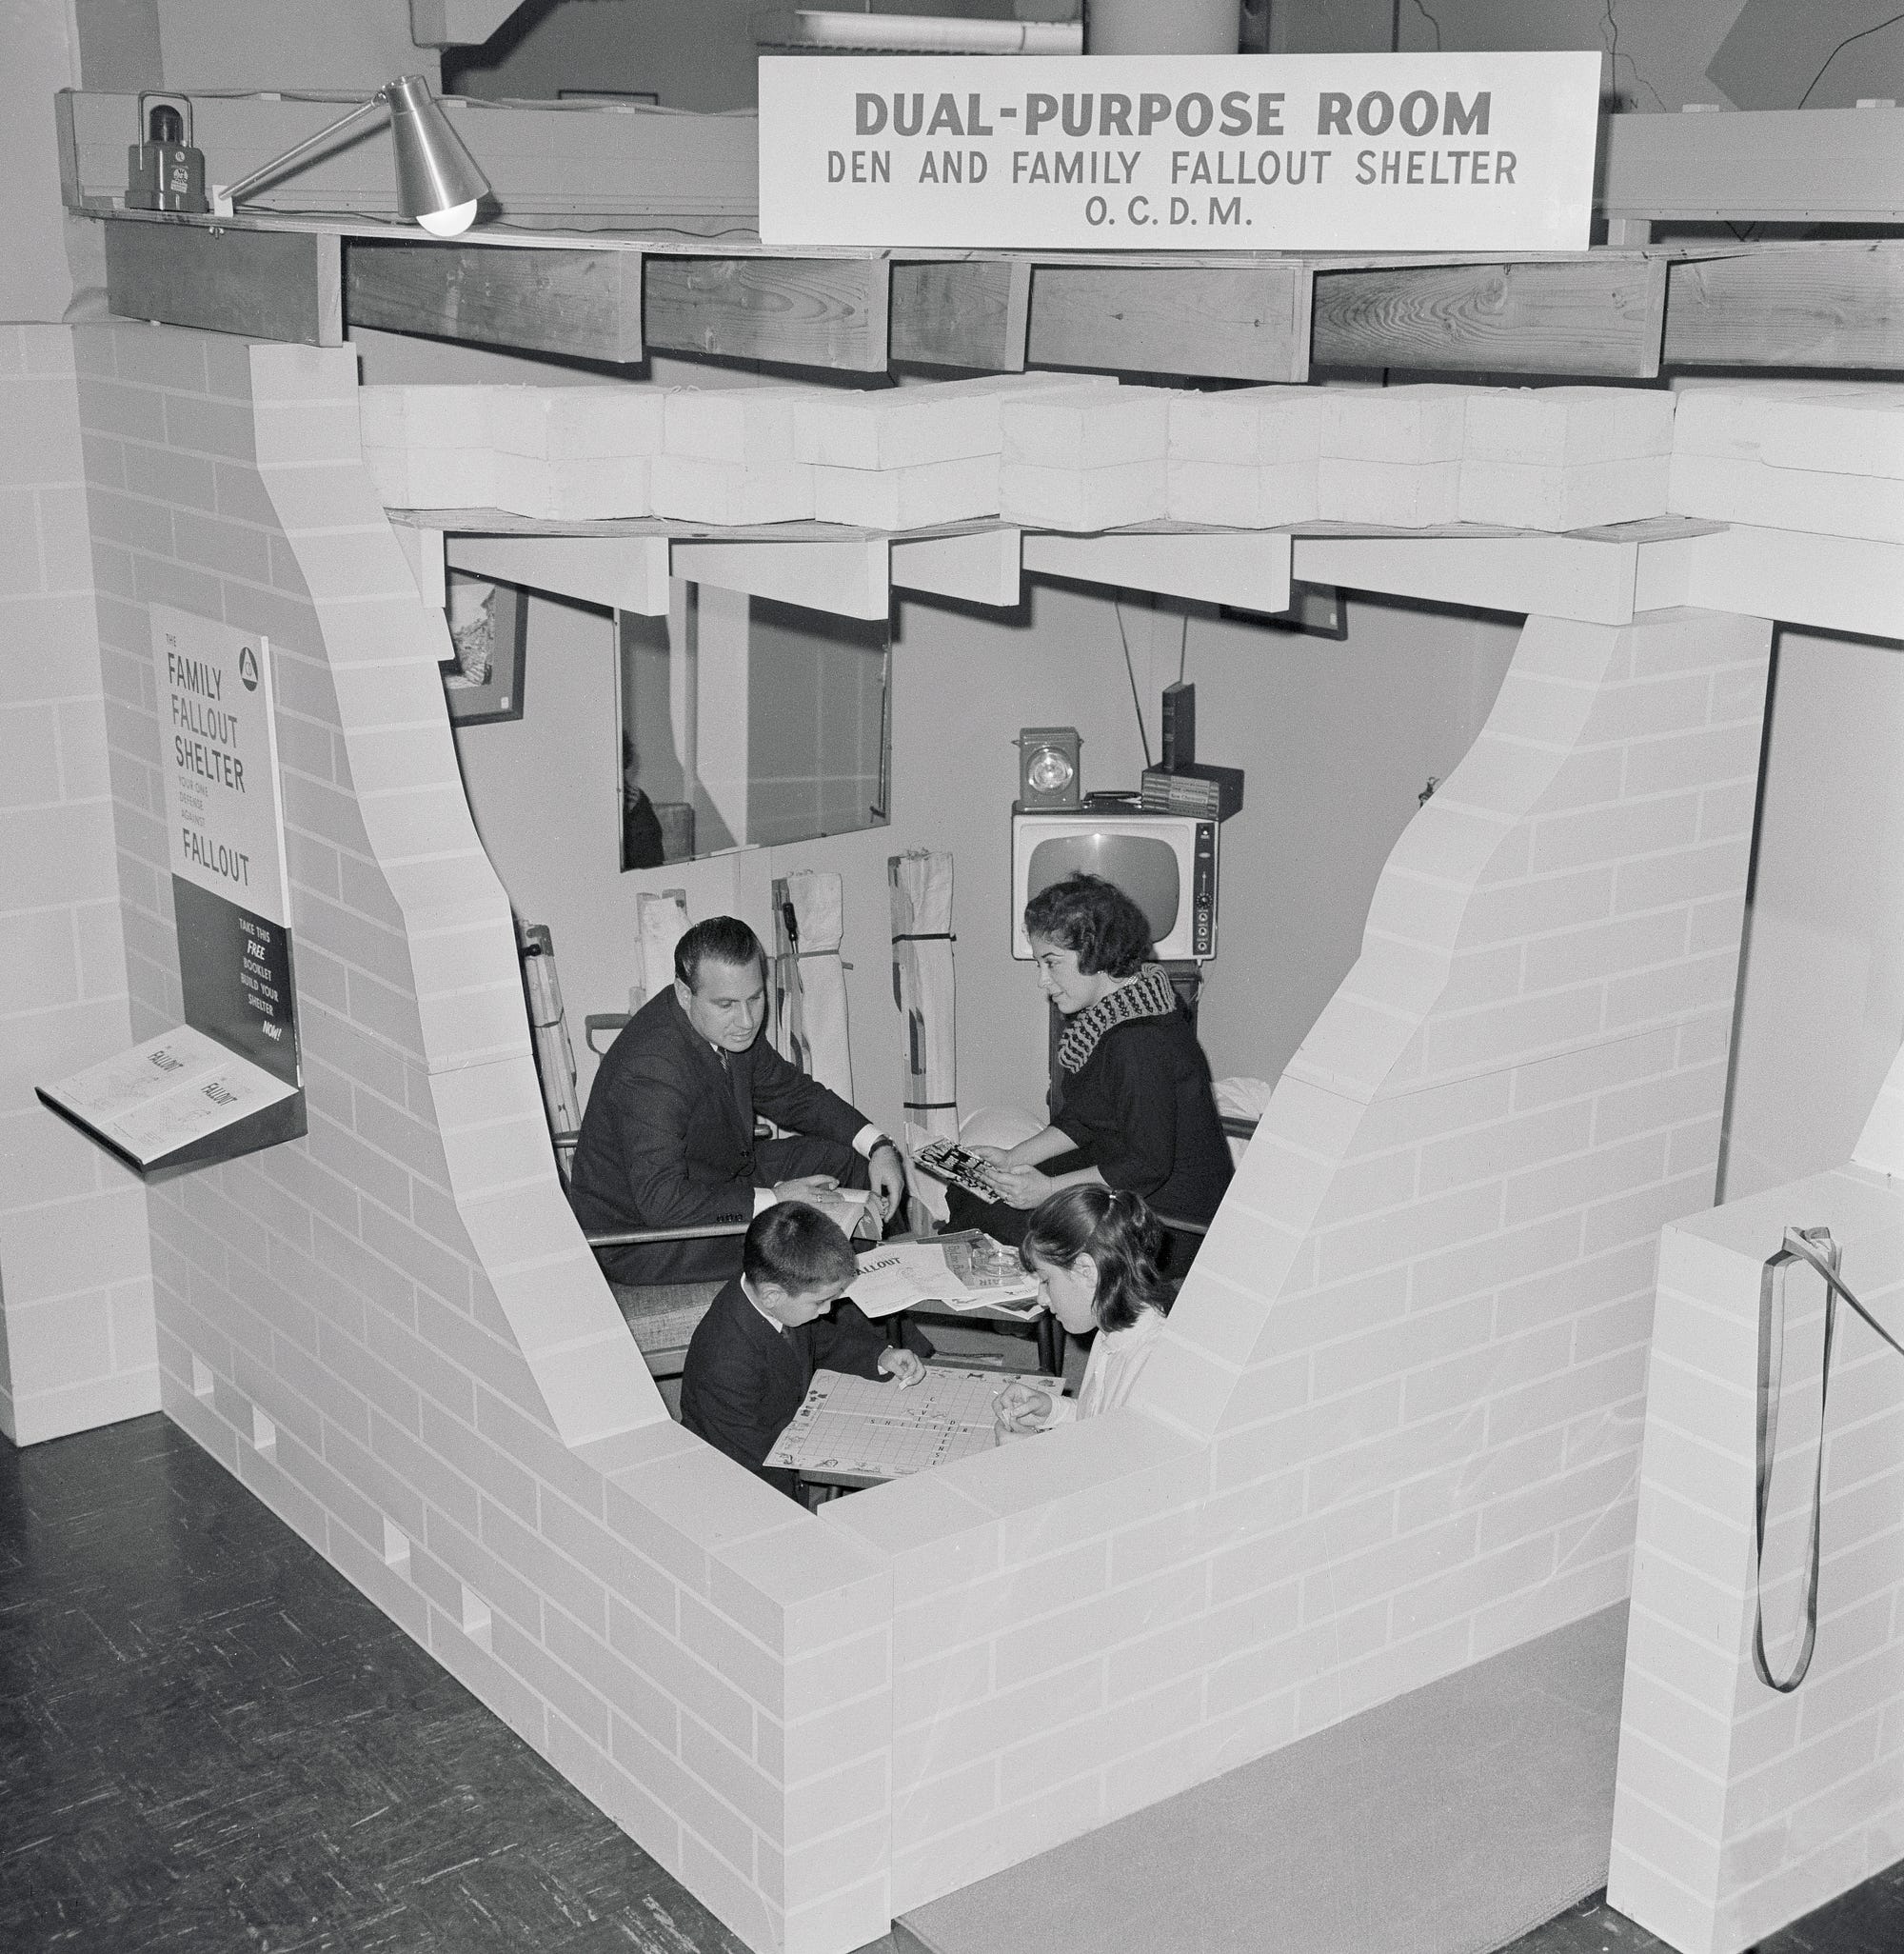 These pictures show how cozy fallout shelters were perfect ...